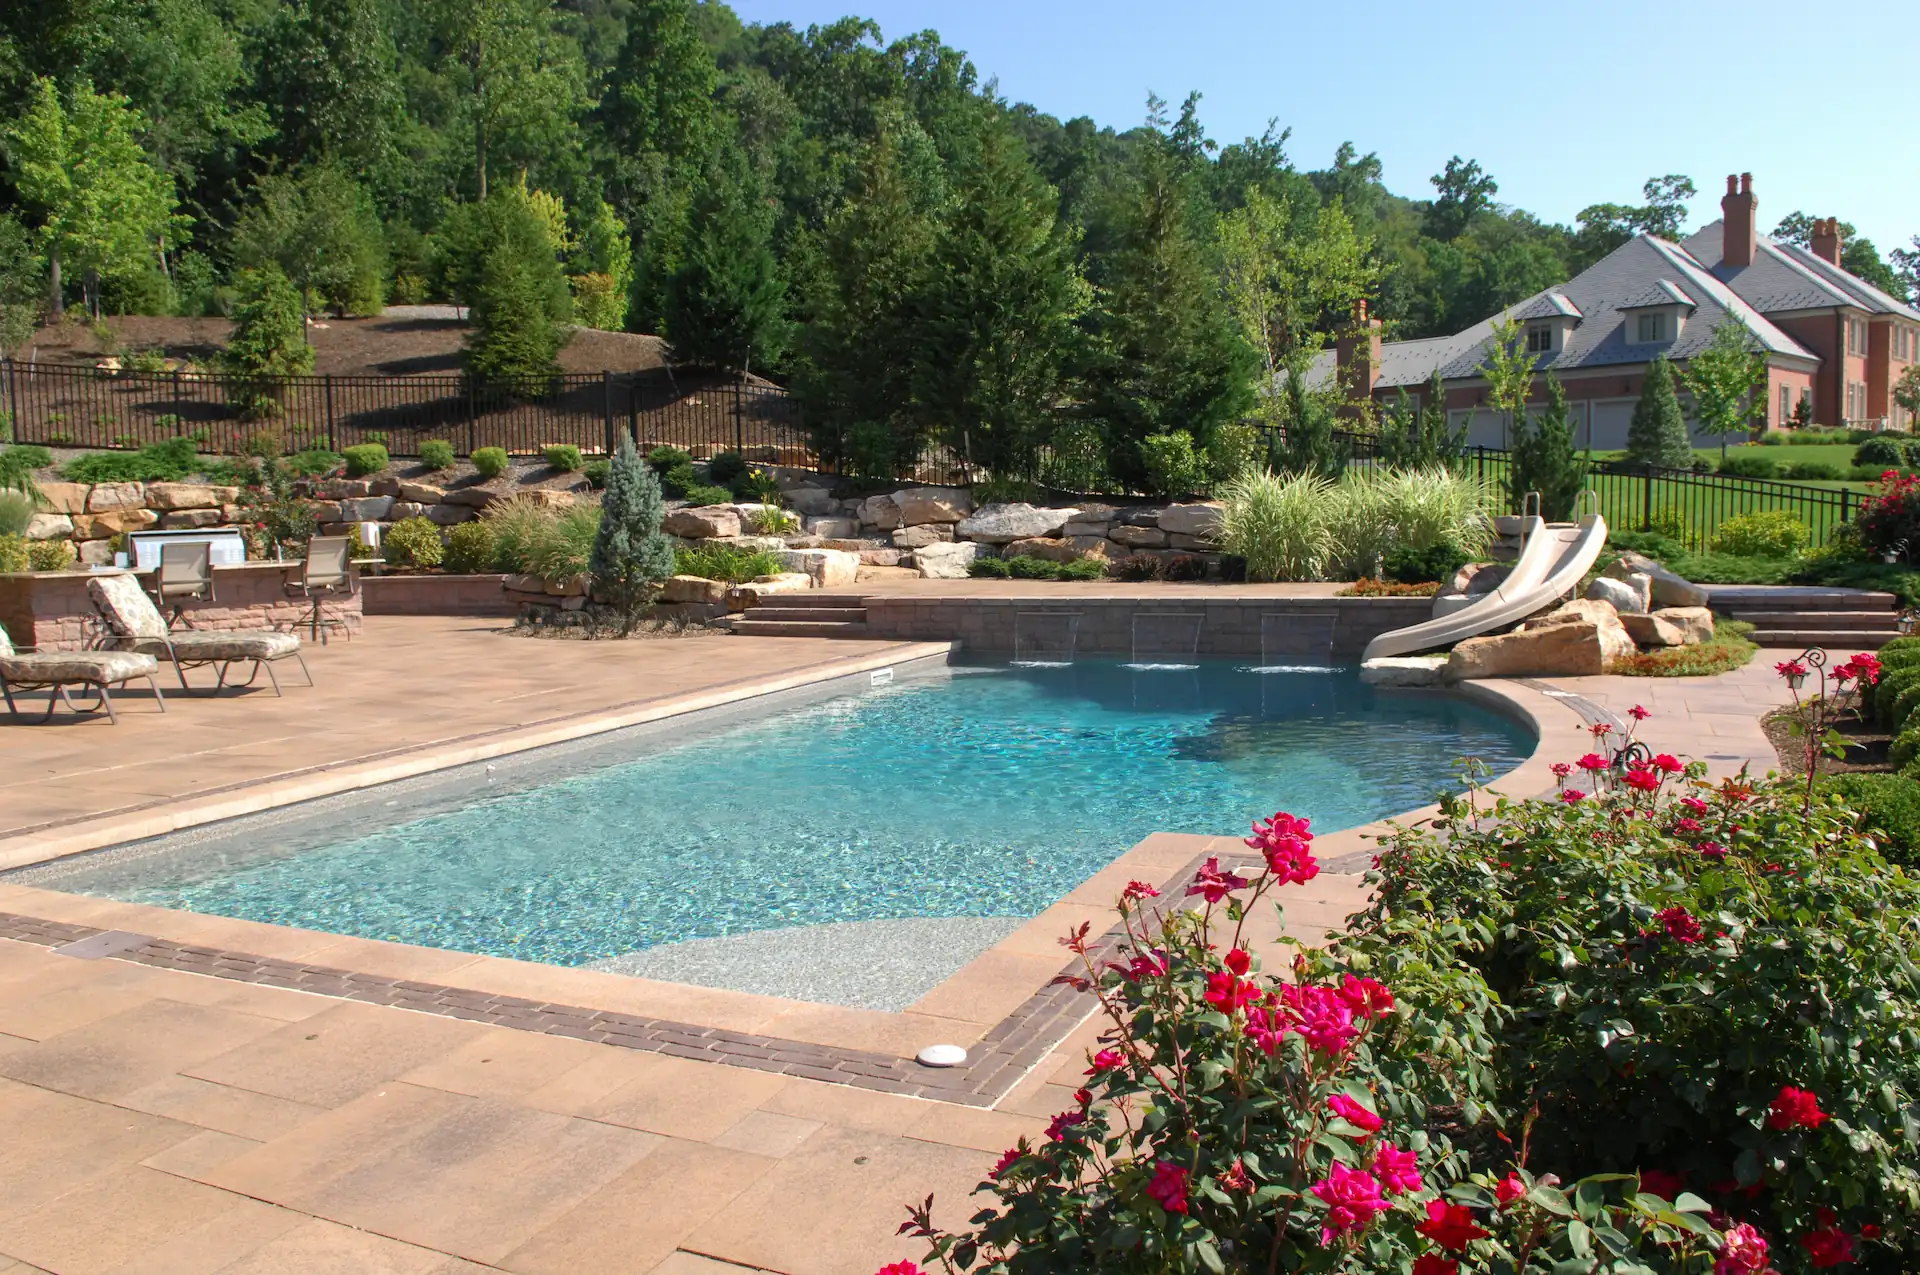 Vinyl Liner Replacement: The Most Underrated Pool Renovation Project